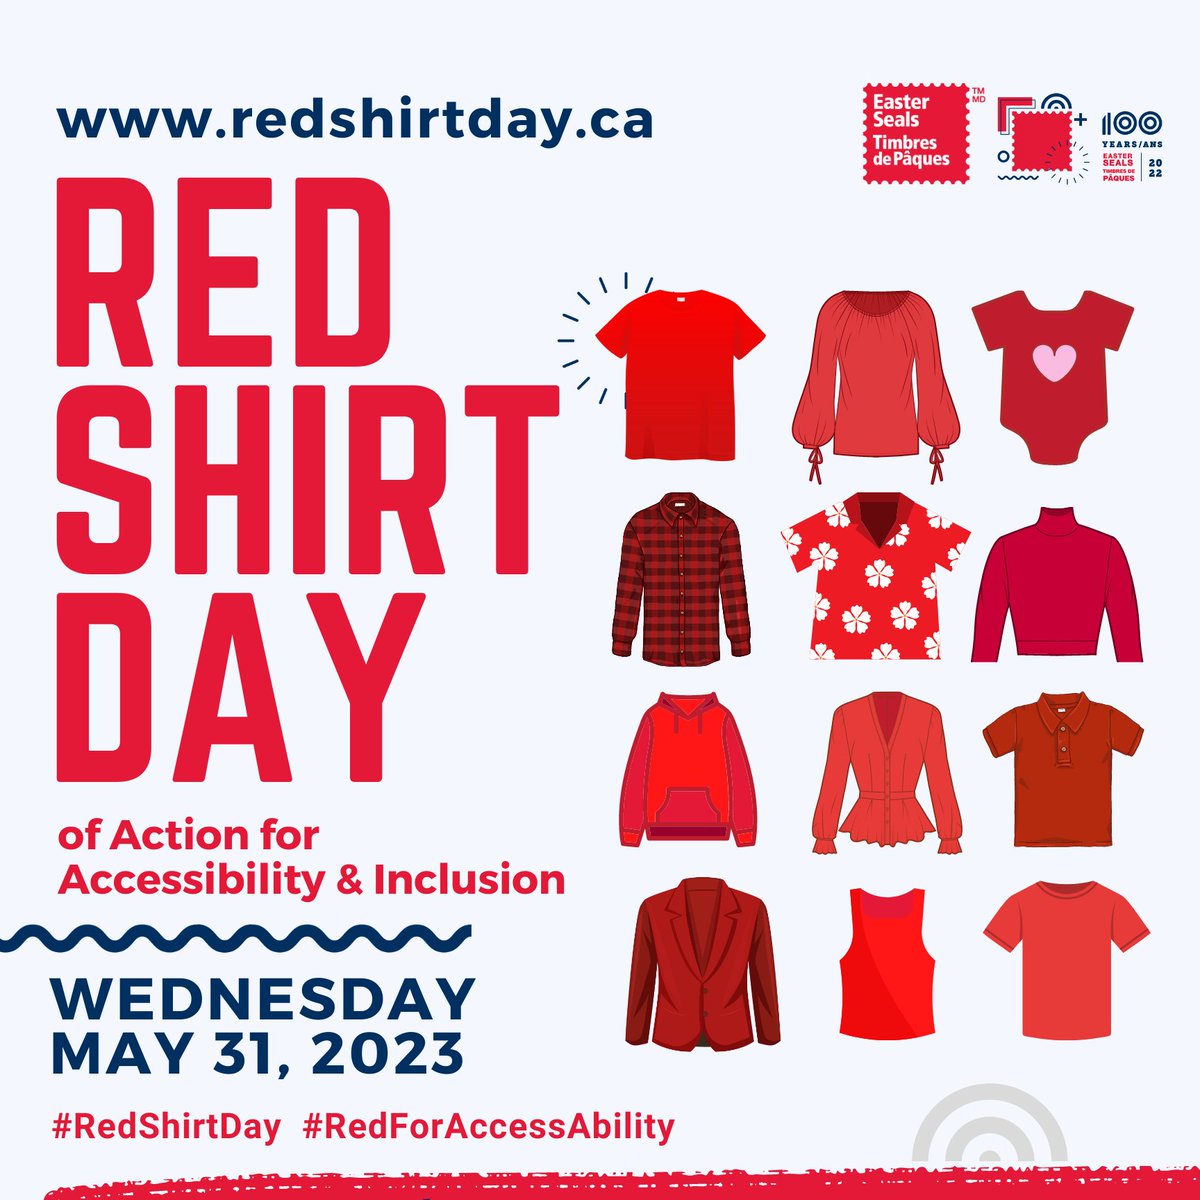 In recognition of Red Shirt Day, Classic Displays pledges to continue providing communities and municipalities with site furniture that meets national and municipal accessibility standards across Canada. 

#RedShirtDay #nationalaccessibilityweek #proudlycanadian